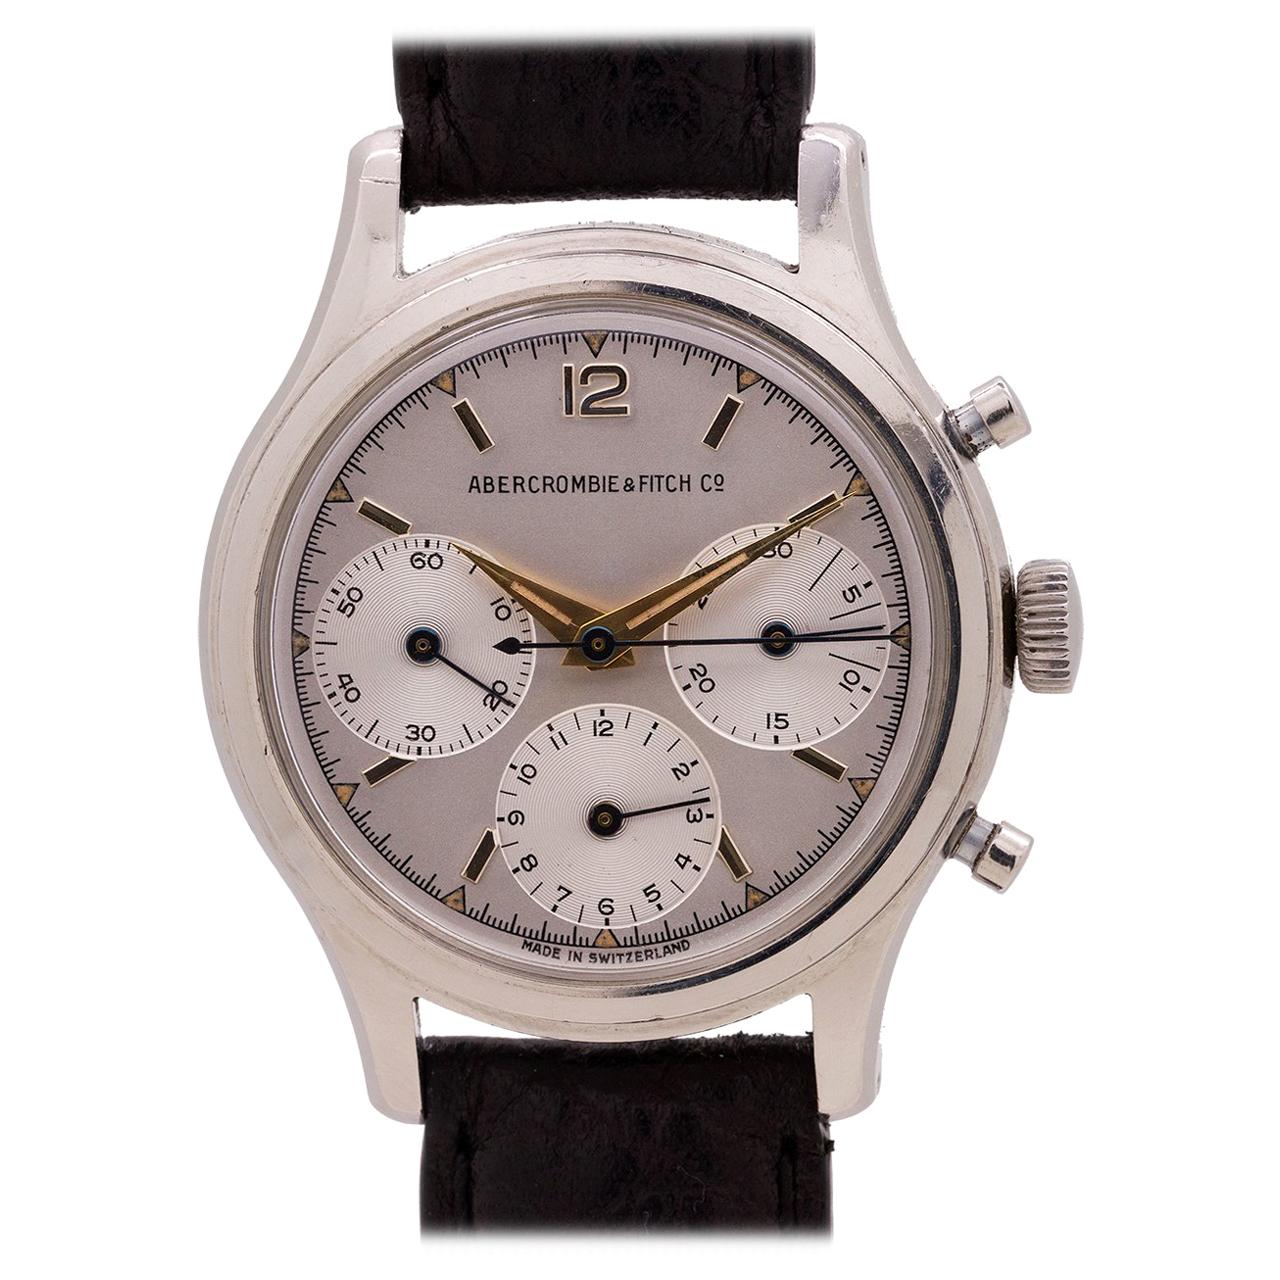 Heuer Abercrombie & Fitch Ref. 2444 Chronograph circa, Early 1960s For Sale